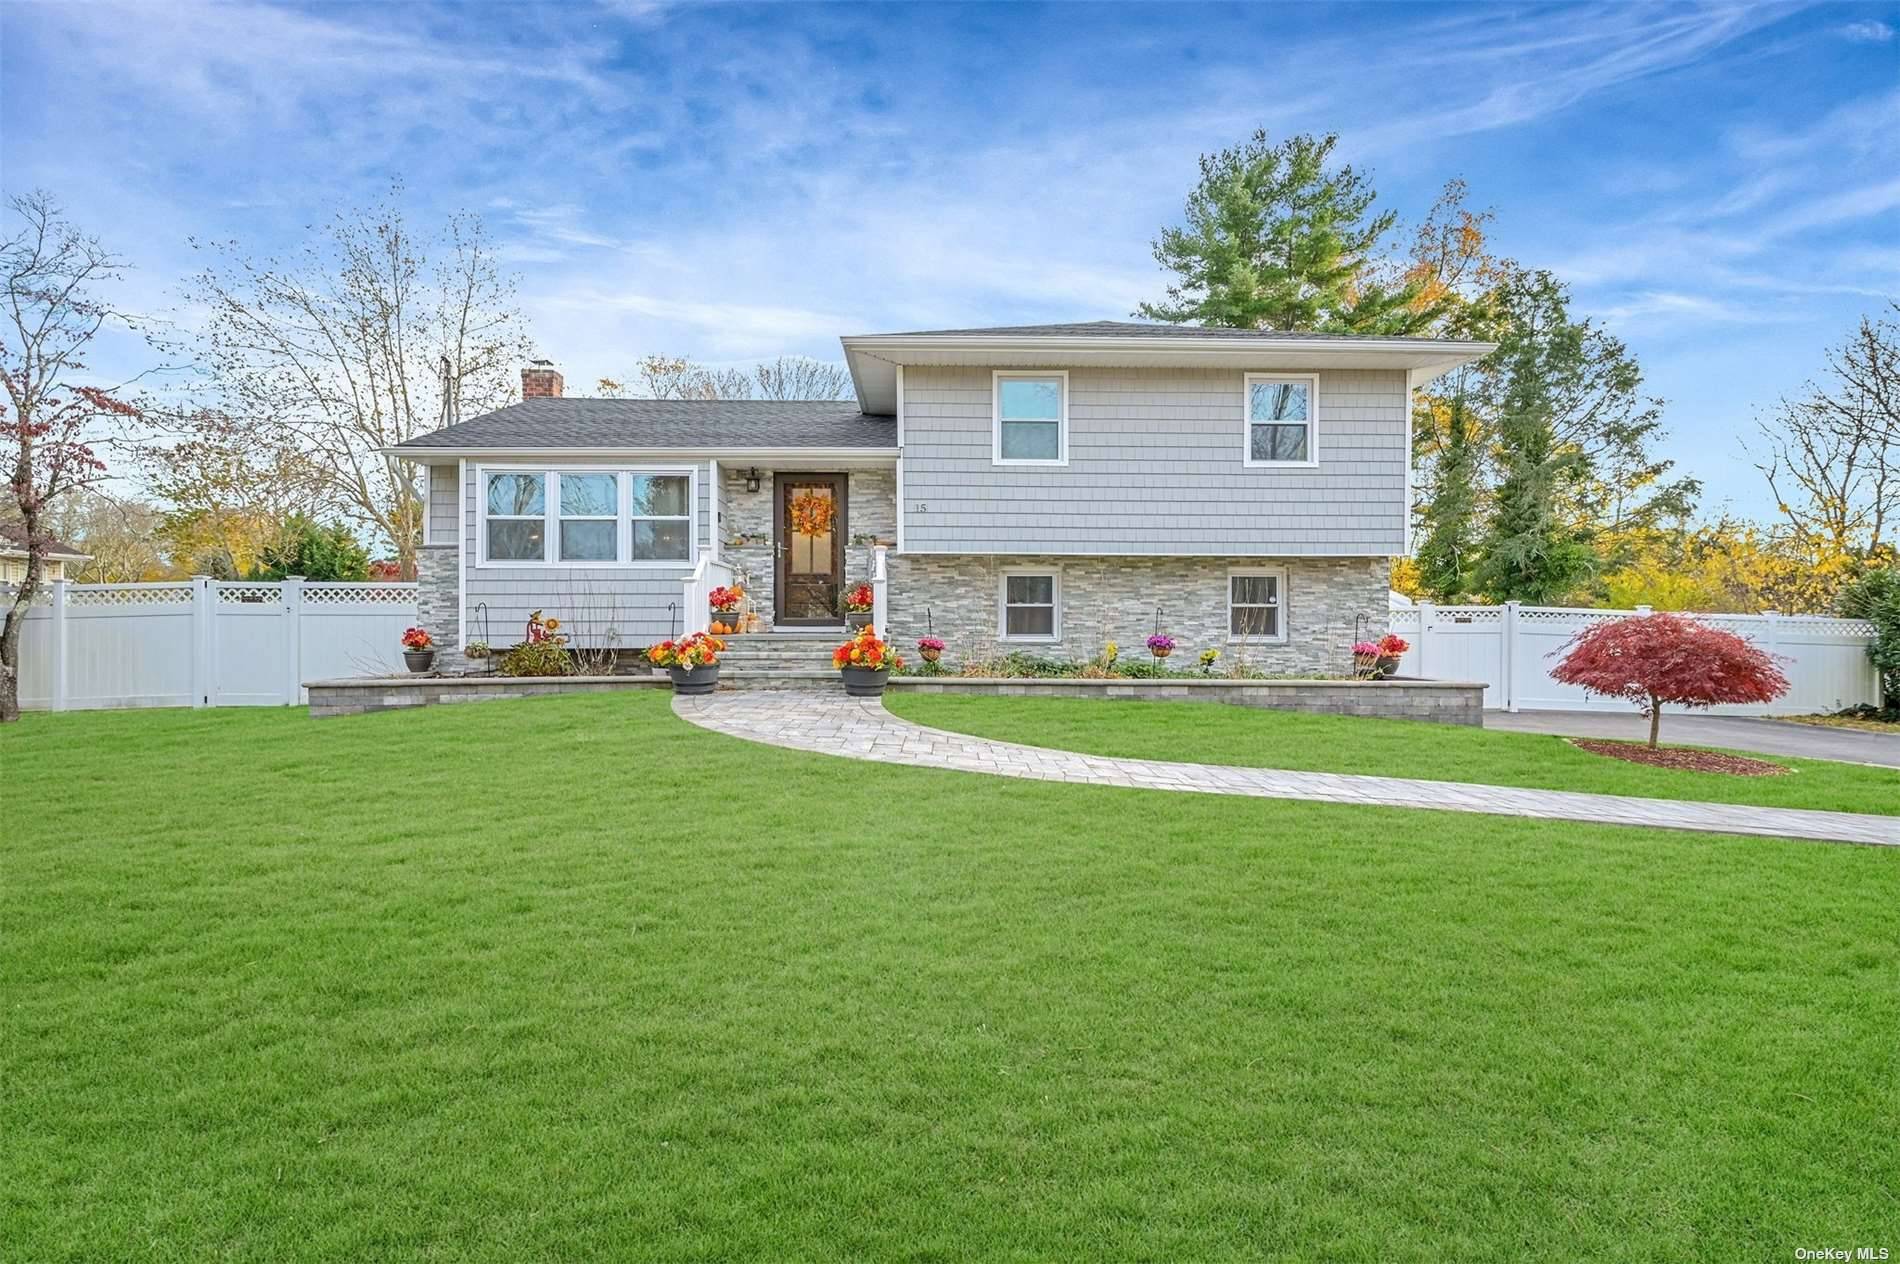 This meticulously kept split level home has it all !